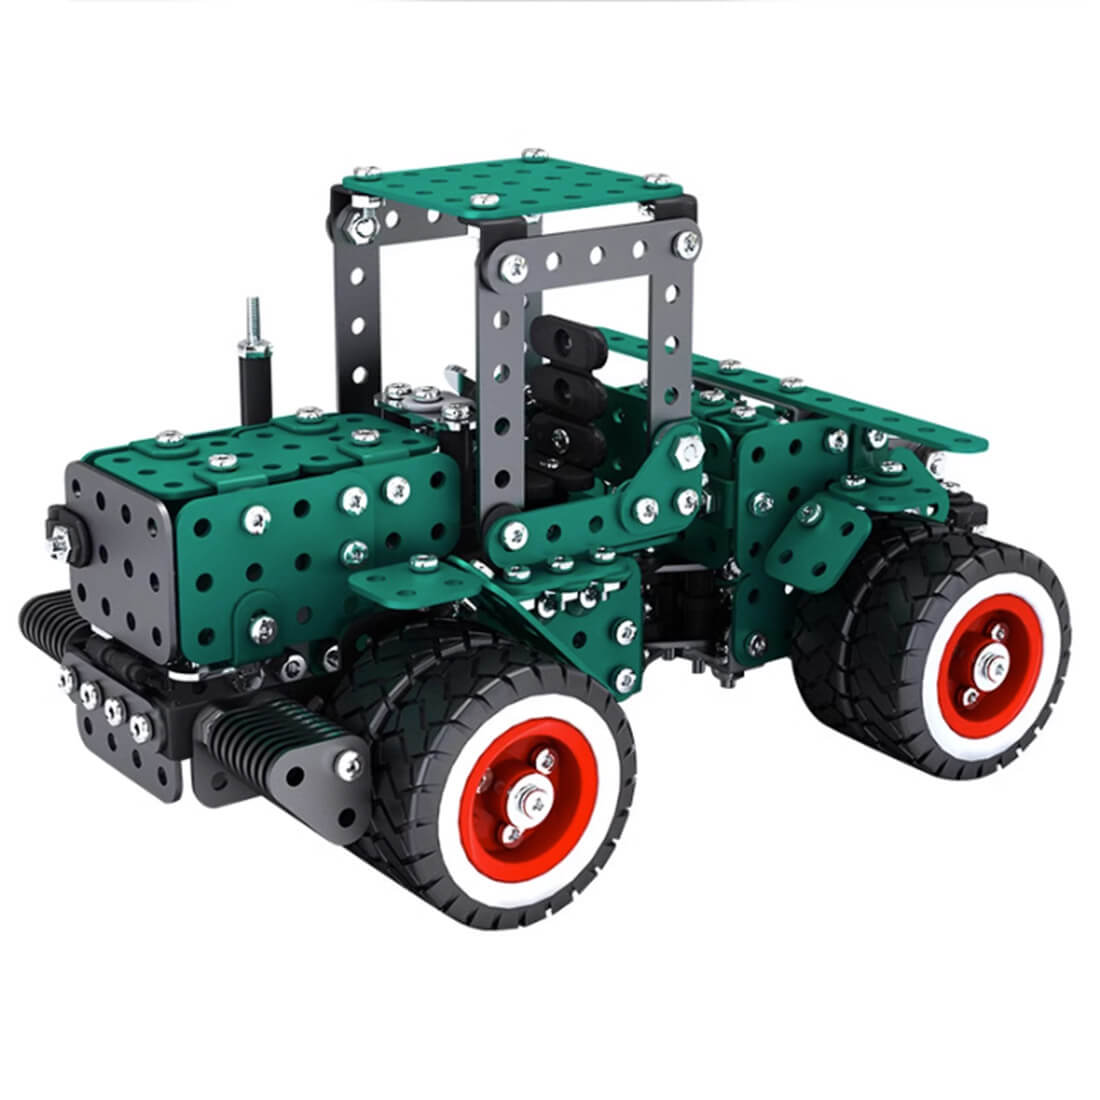 Metal Assembly Farm Grading Machine Model 3D DIY Agricultural Vehicle Assembly Model Creative Ornaments (680+PCS)